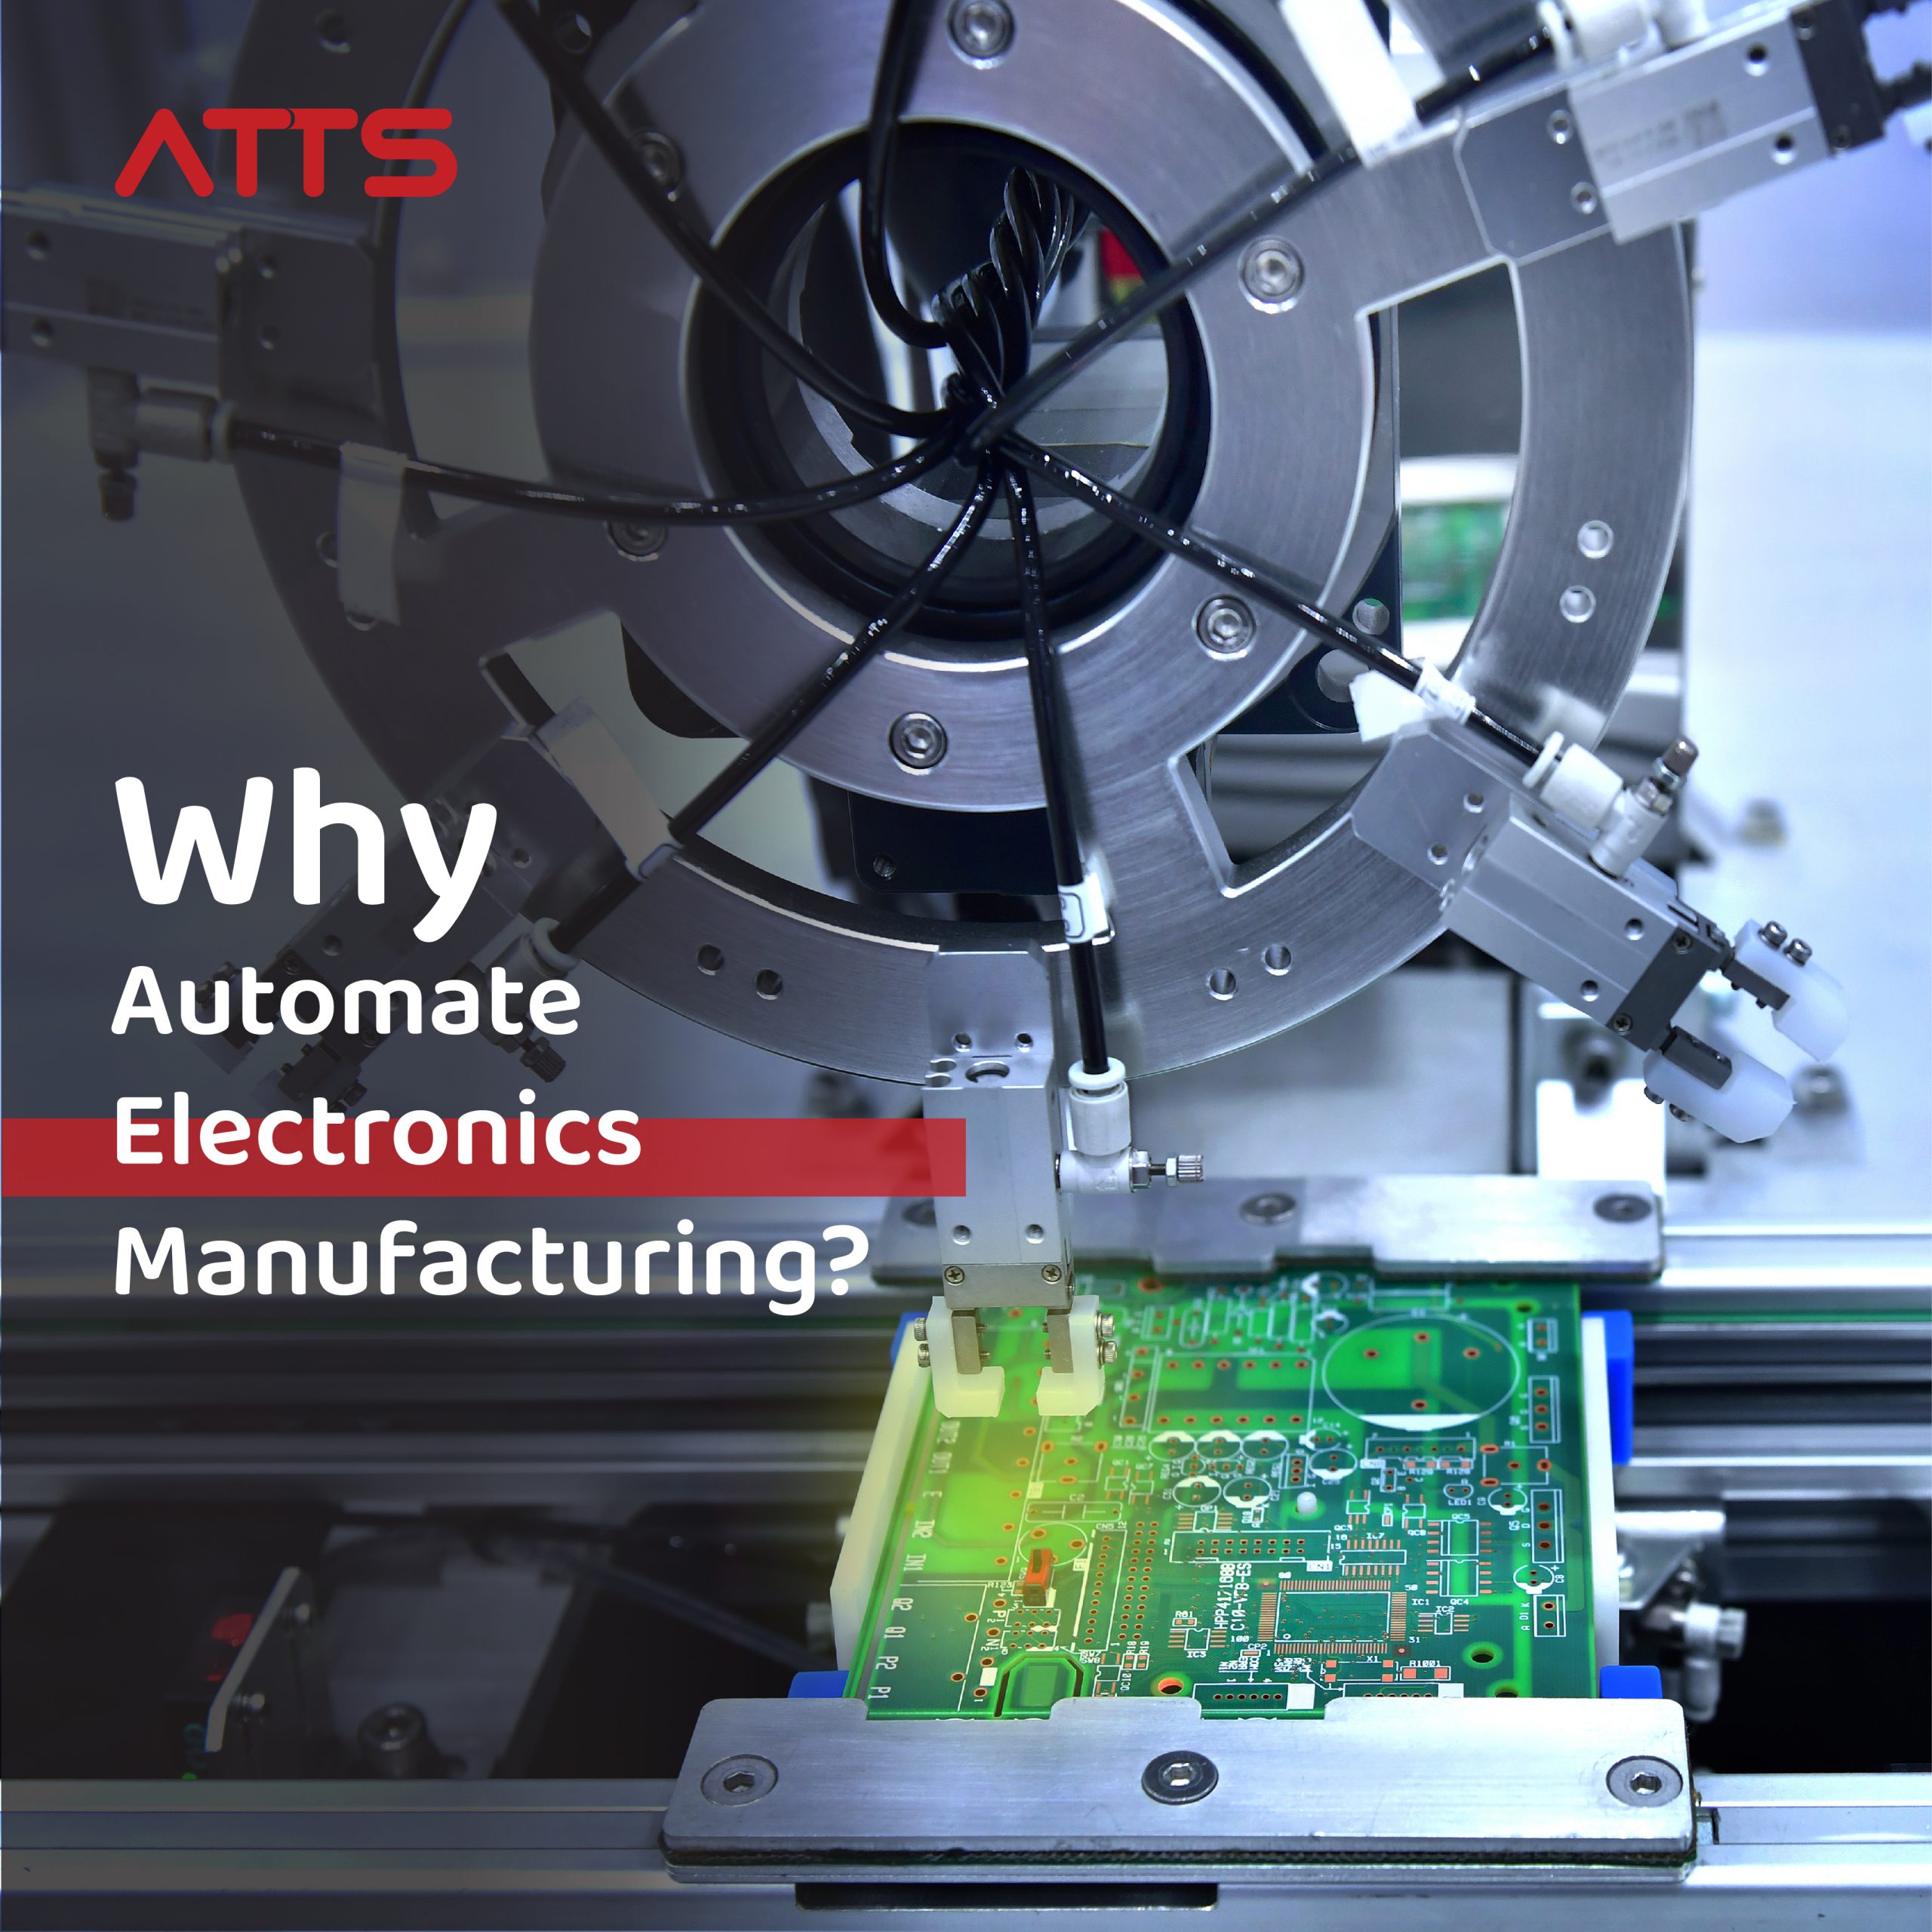 The electronics industry requires flexible and highly accurate automation systems.